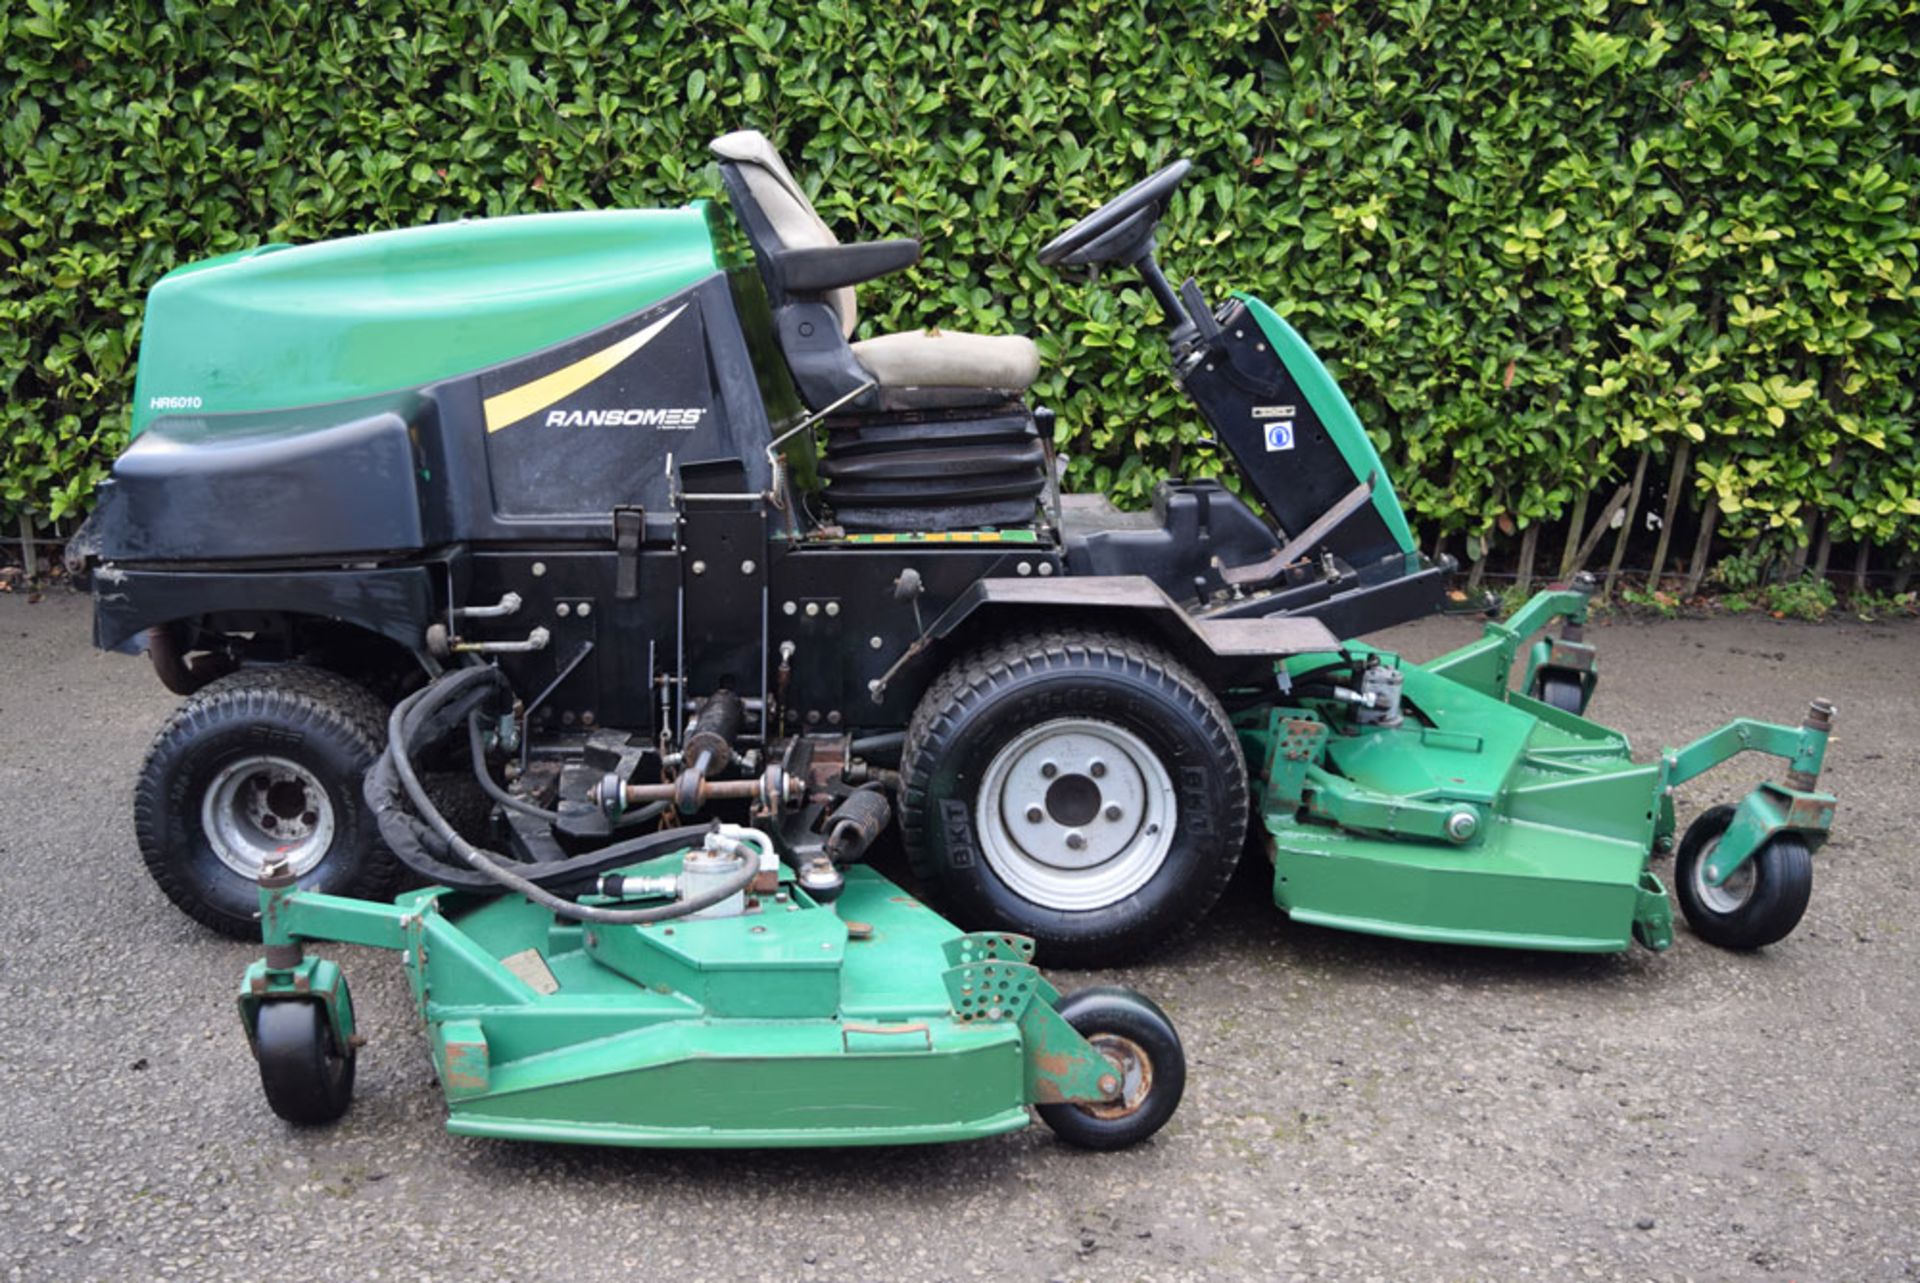 Ransomes HR6010 Wide Area Cut Ride On Rotary Mower - Image 2 of 3